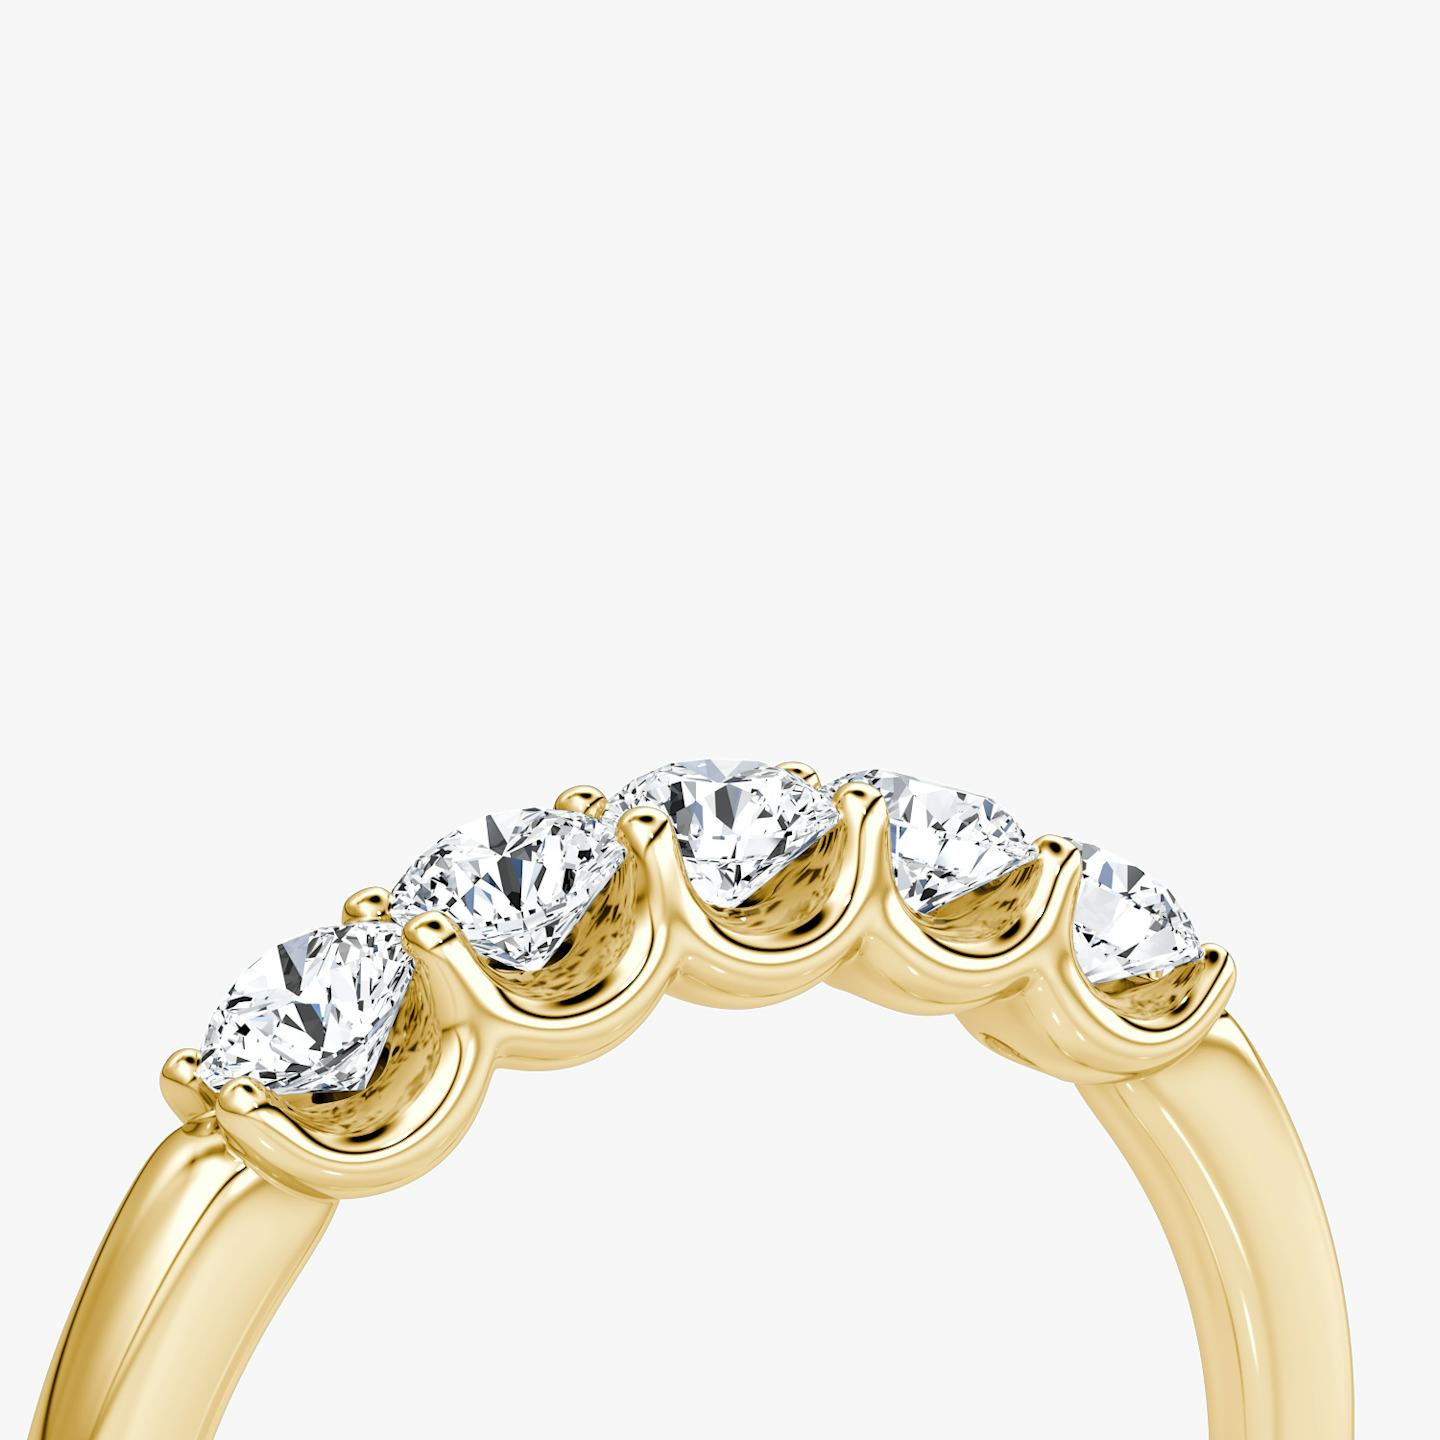 The Five Stone Band | Round Brilliant | 18k | 18k Yellow Gold | Band width: Petite | Version: Petite